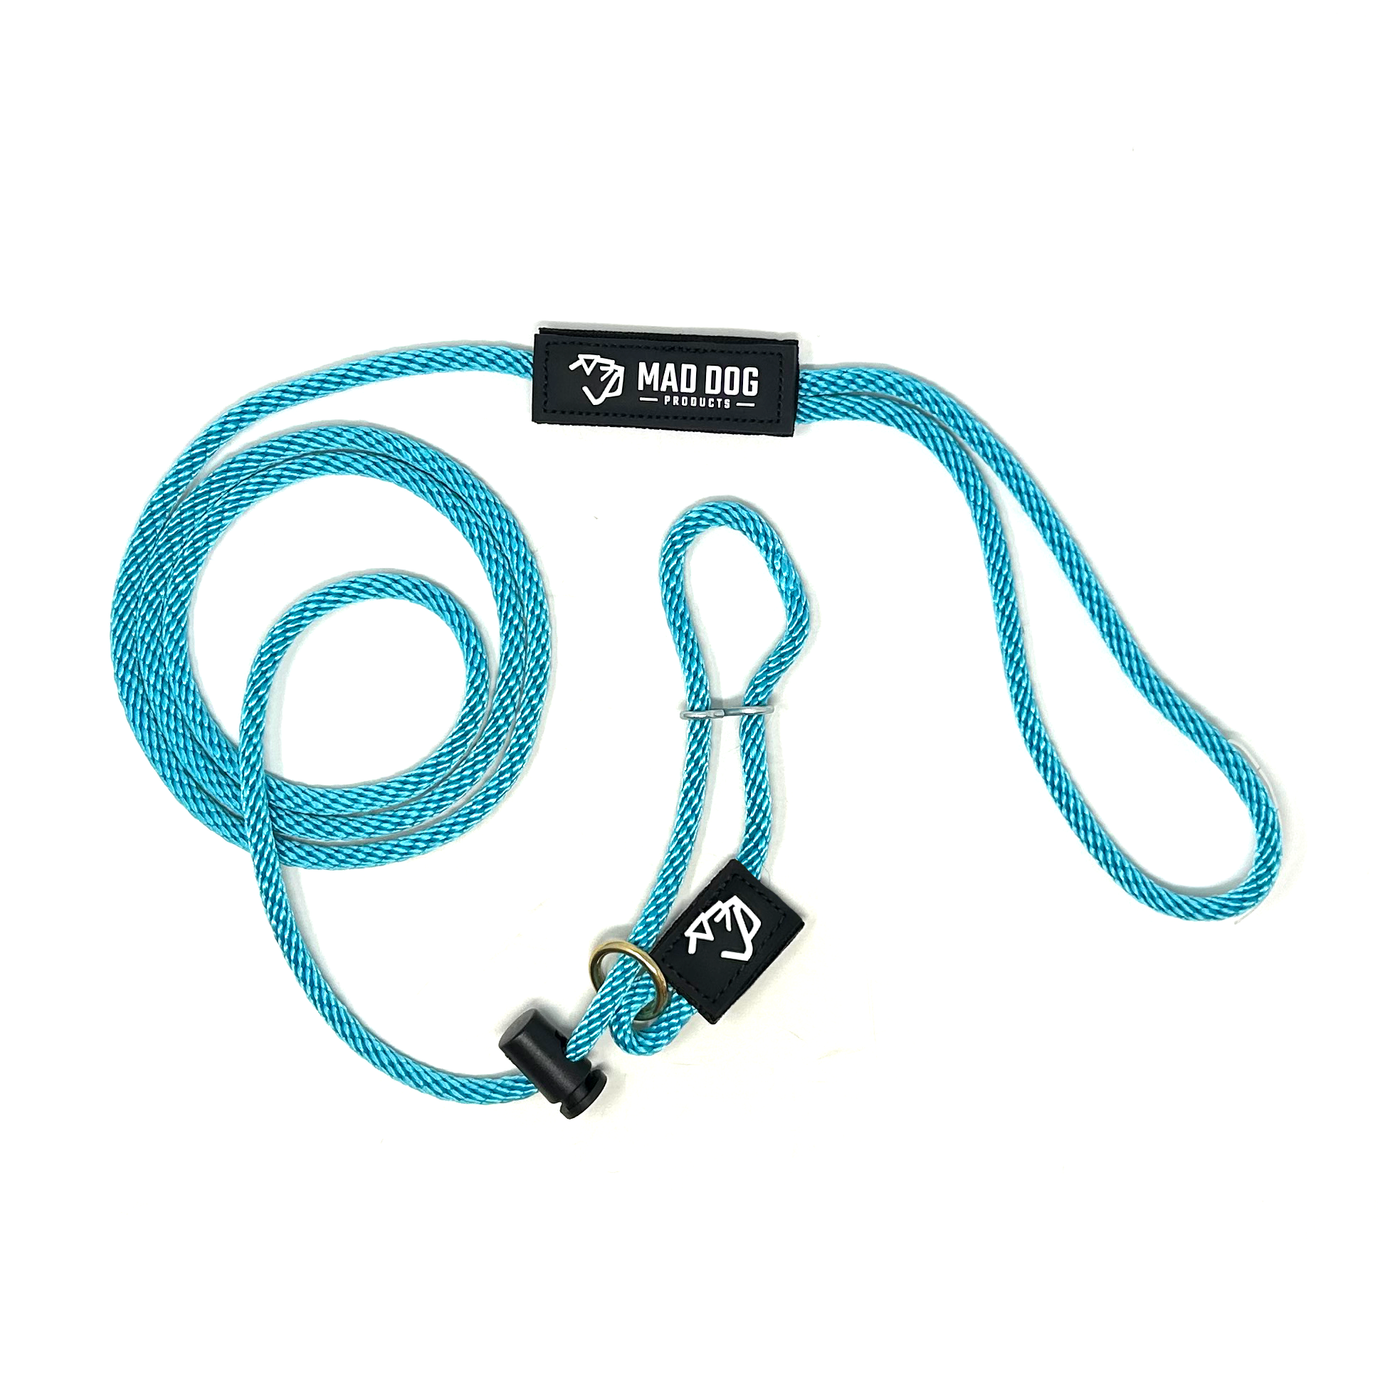 Mad Dog Products 'Easy Leader' Slip Leash - 1/4"